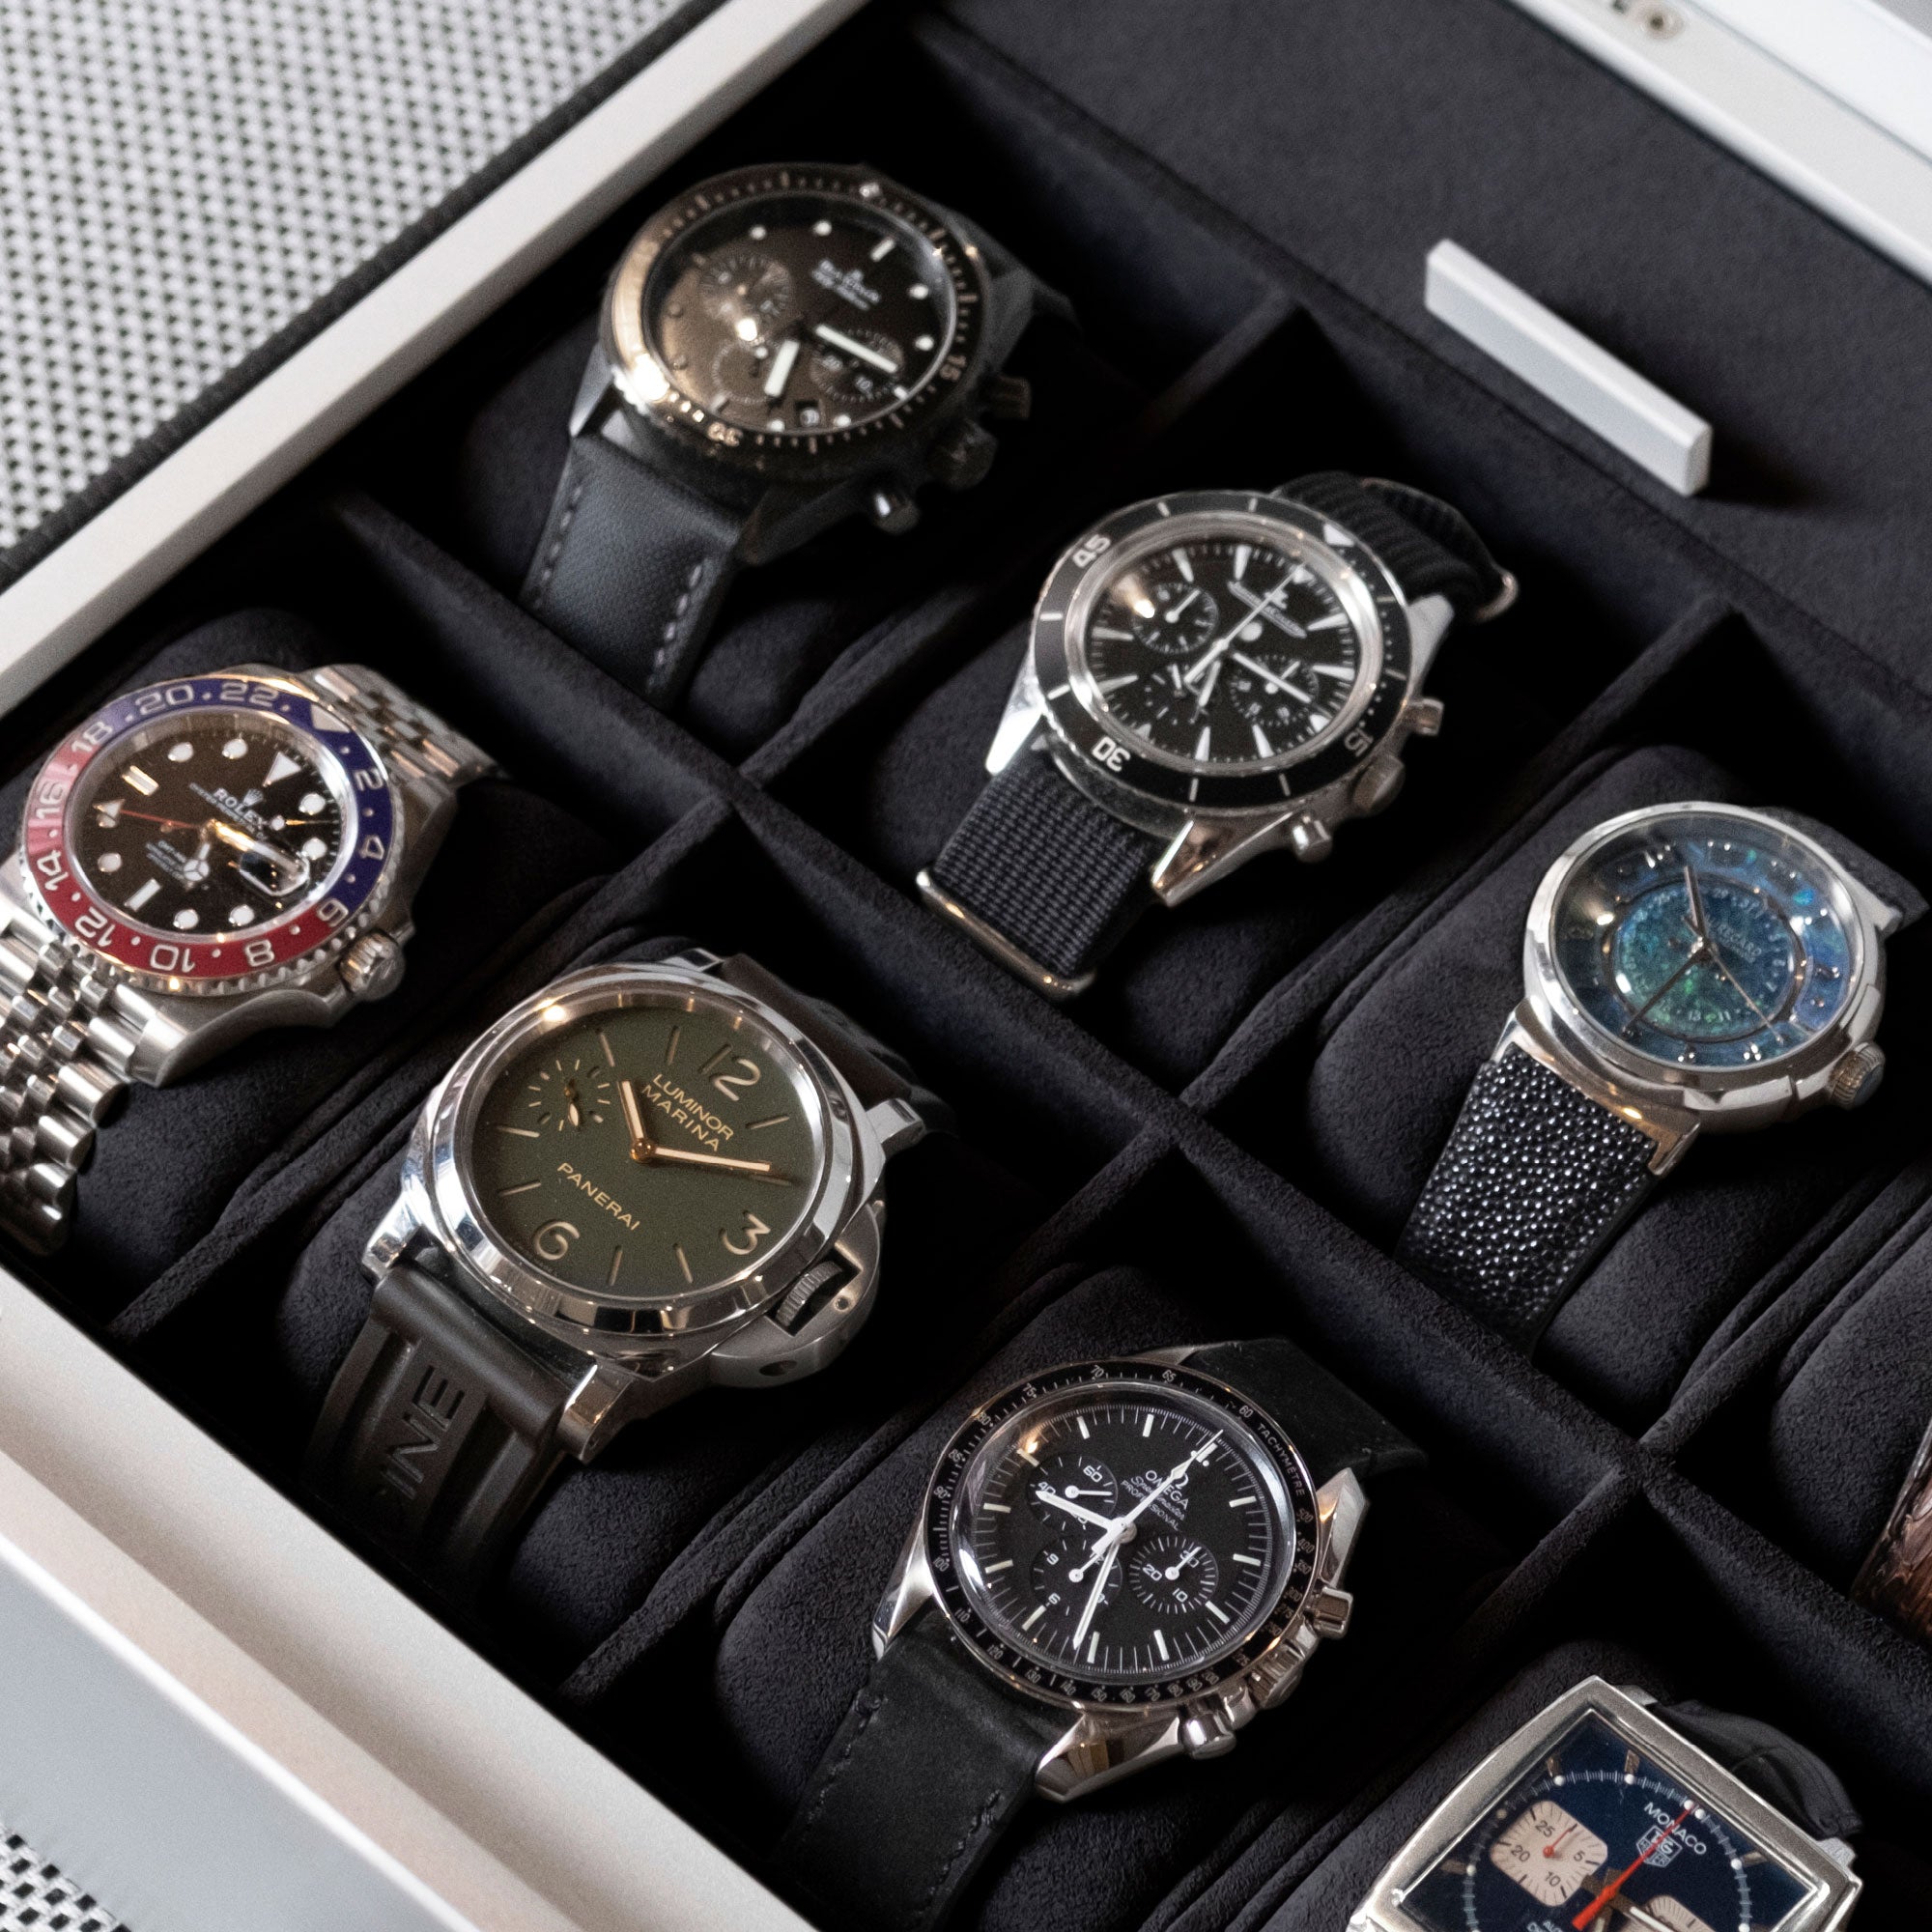 Detail shot of luxury watches including Panerai, Omega, Tag Heuer, Rolex and Jaeger LeCoultre displayed in Spence 12 Watch box by Charles Simons